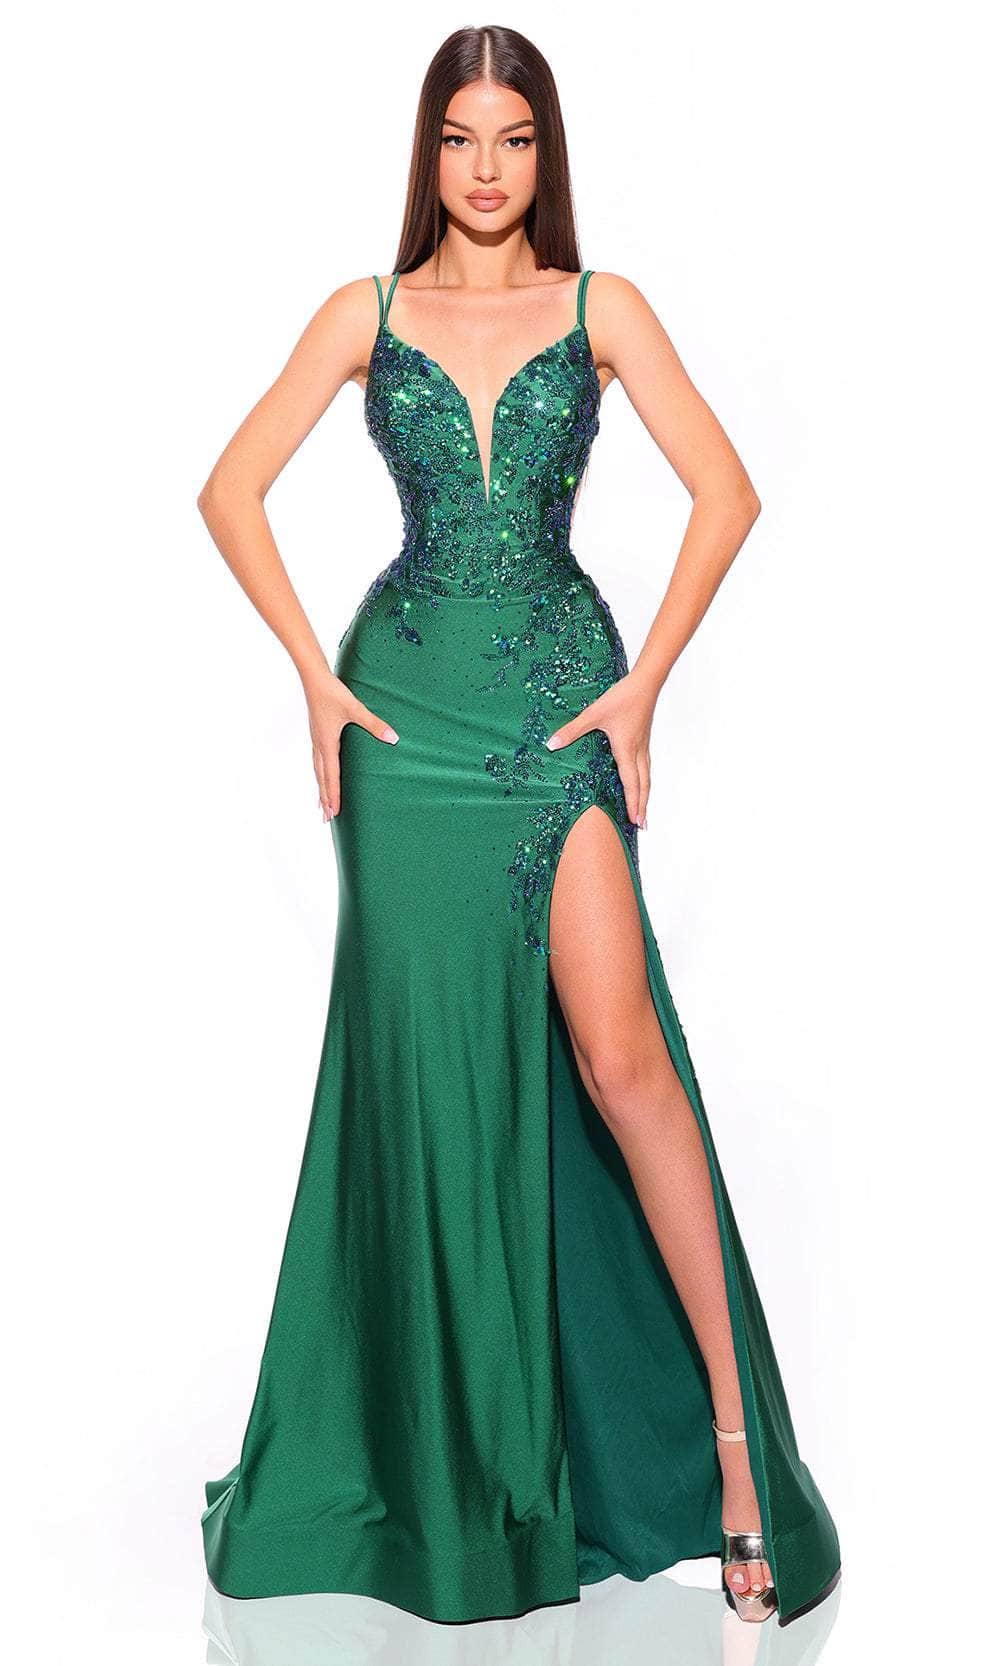 Amarra 88813 - Plunging Sweetheart Sequin Prom Dress
